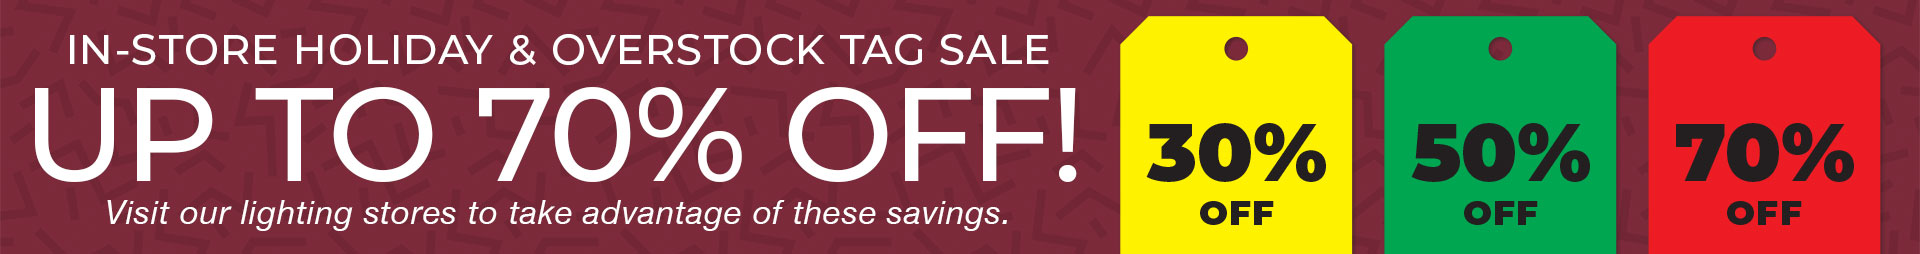 In-Store TAG Sale - Up to 70% Off - Imagine More